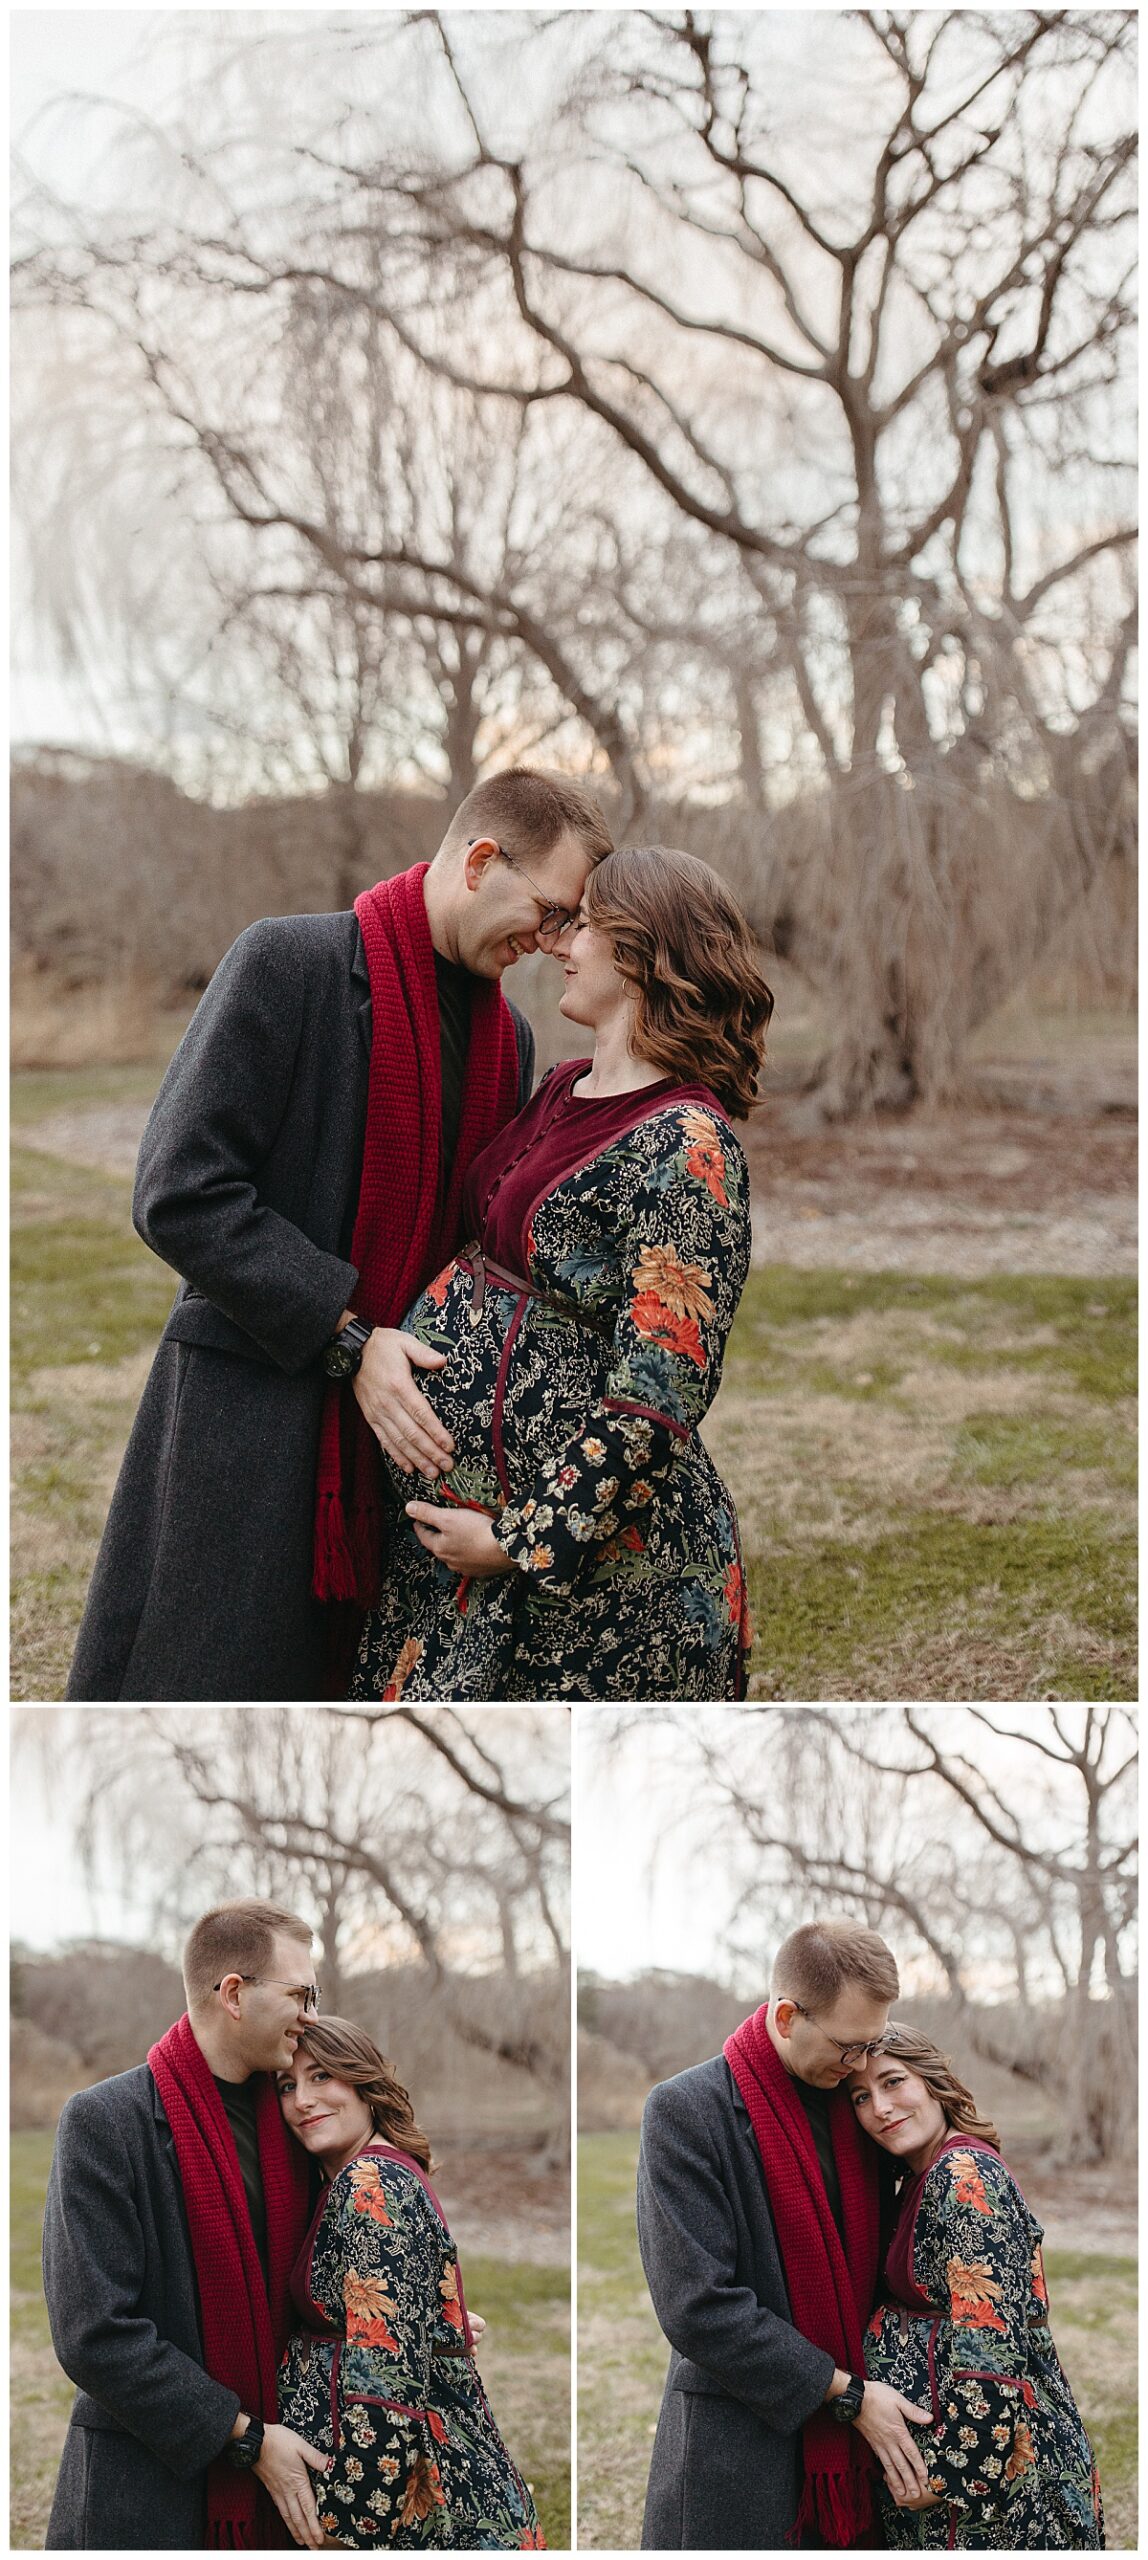 man leans in placing hand on woman's growing belly at Garden Maternity Session